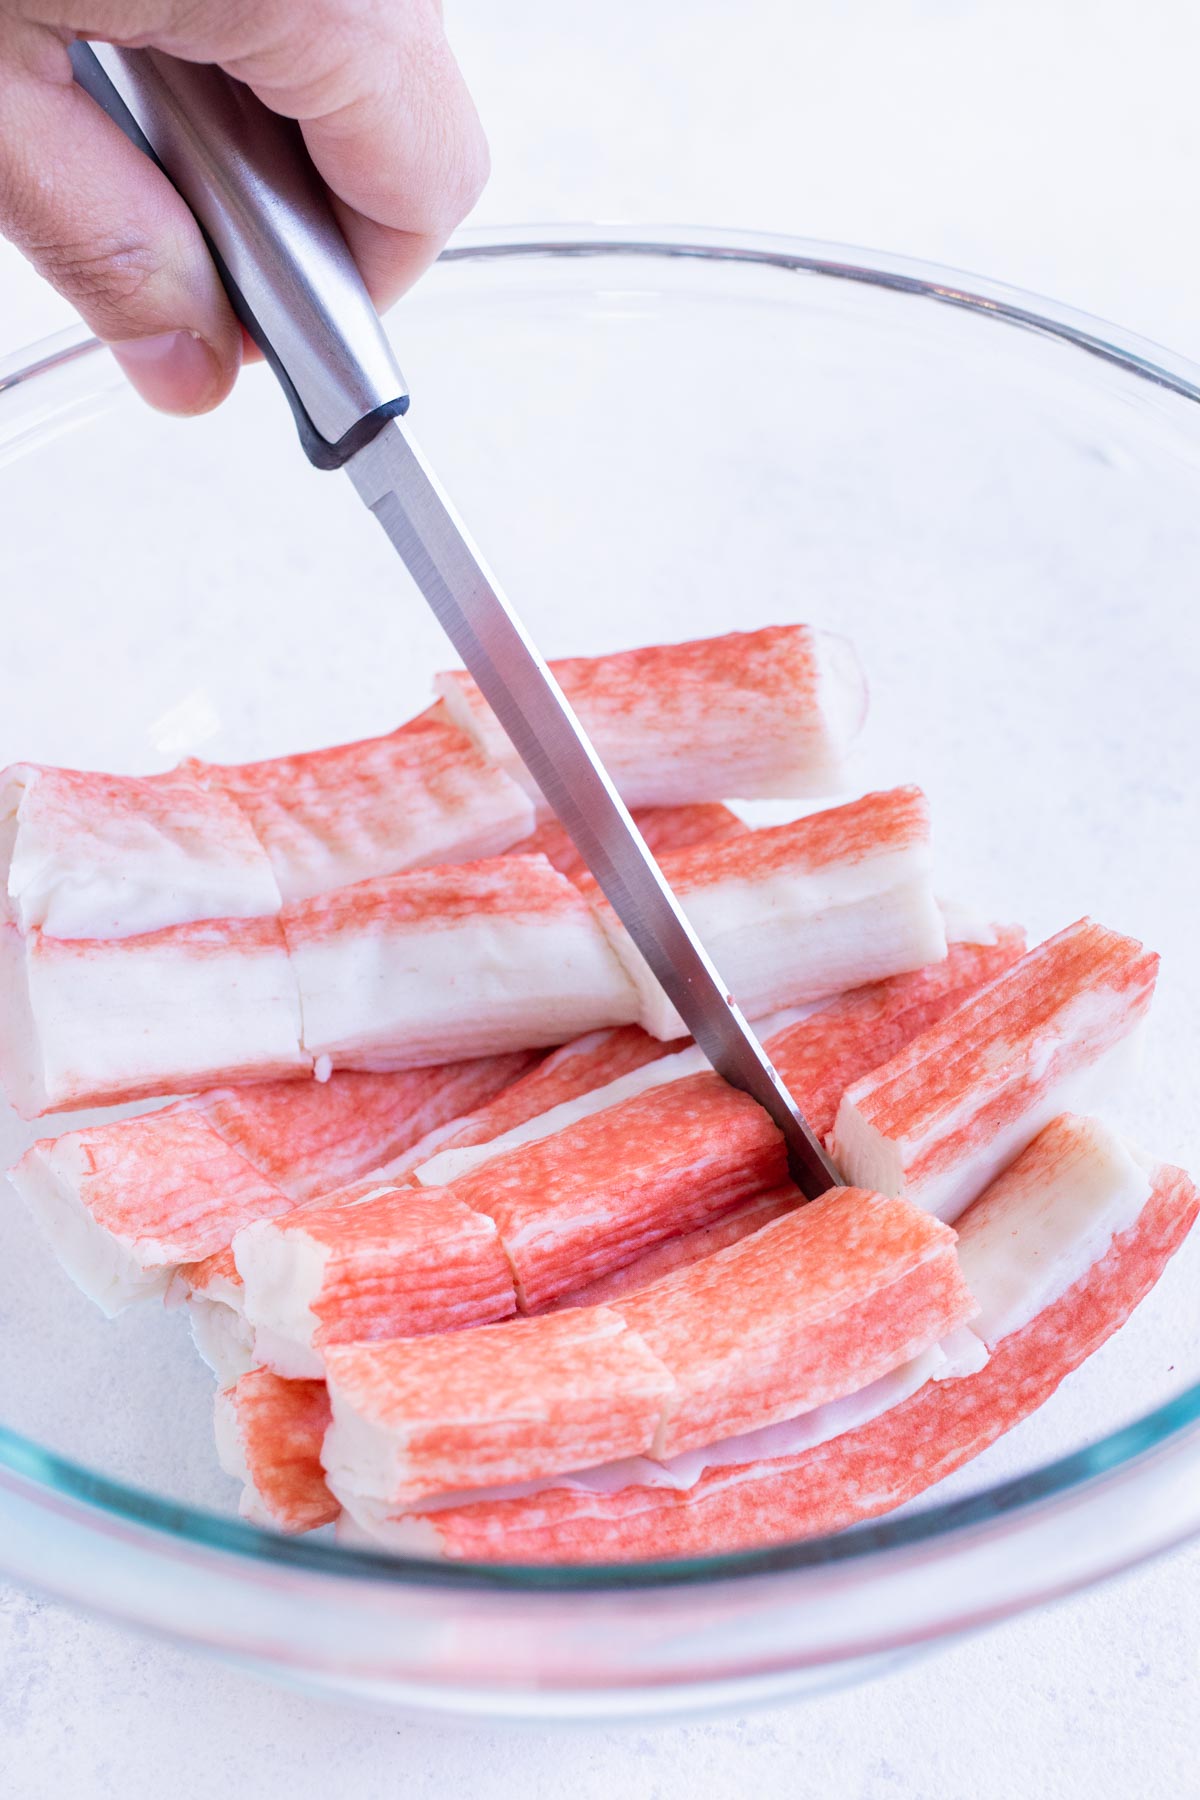 Imitation crab sticks are cut into pieces in a bowl.